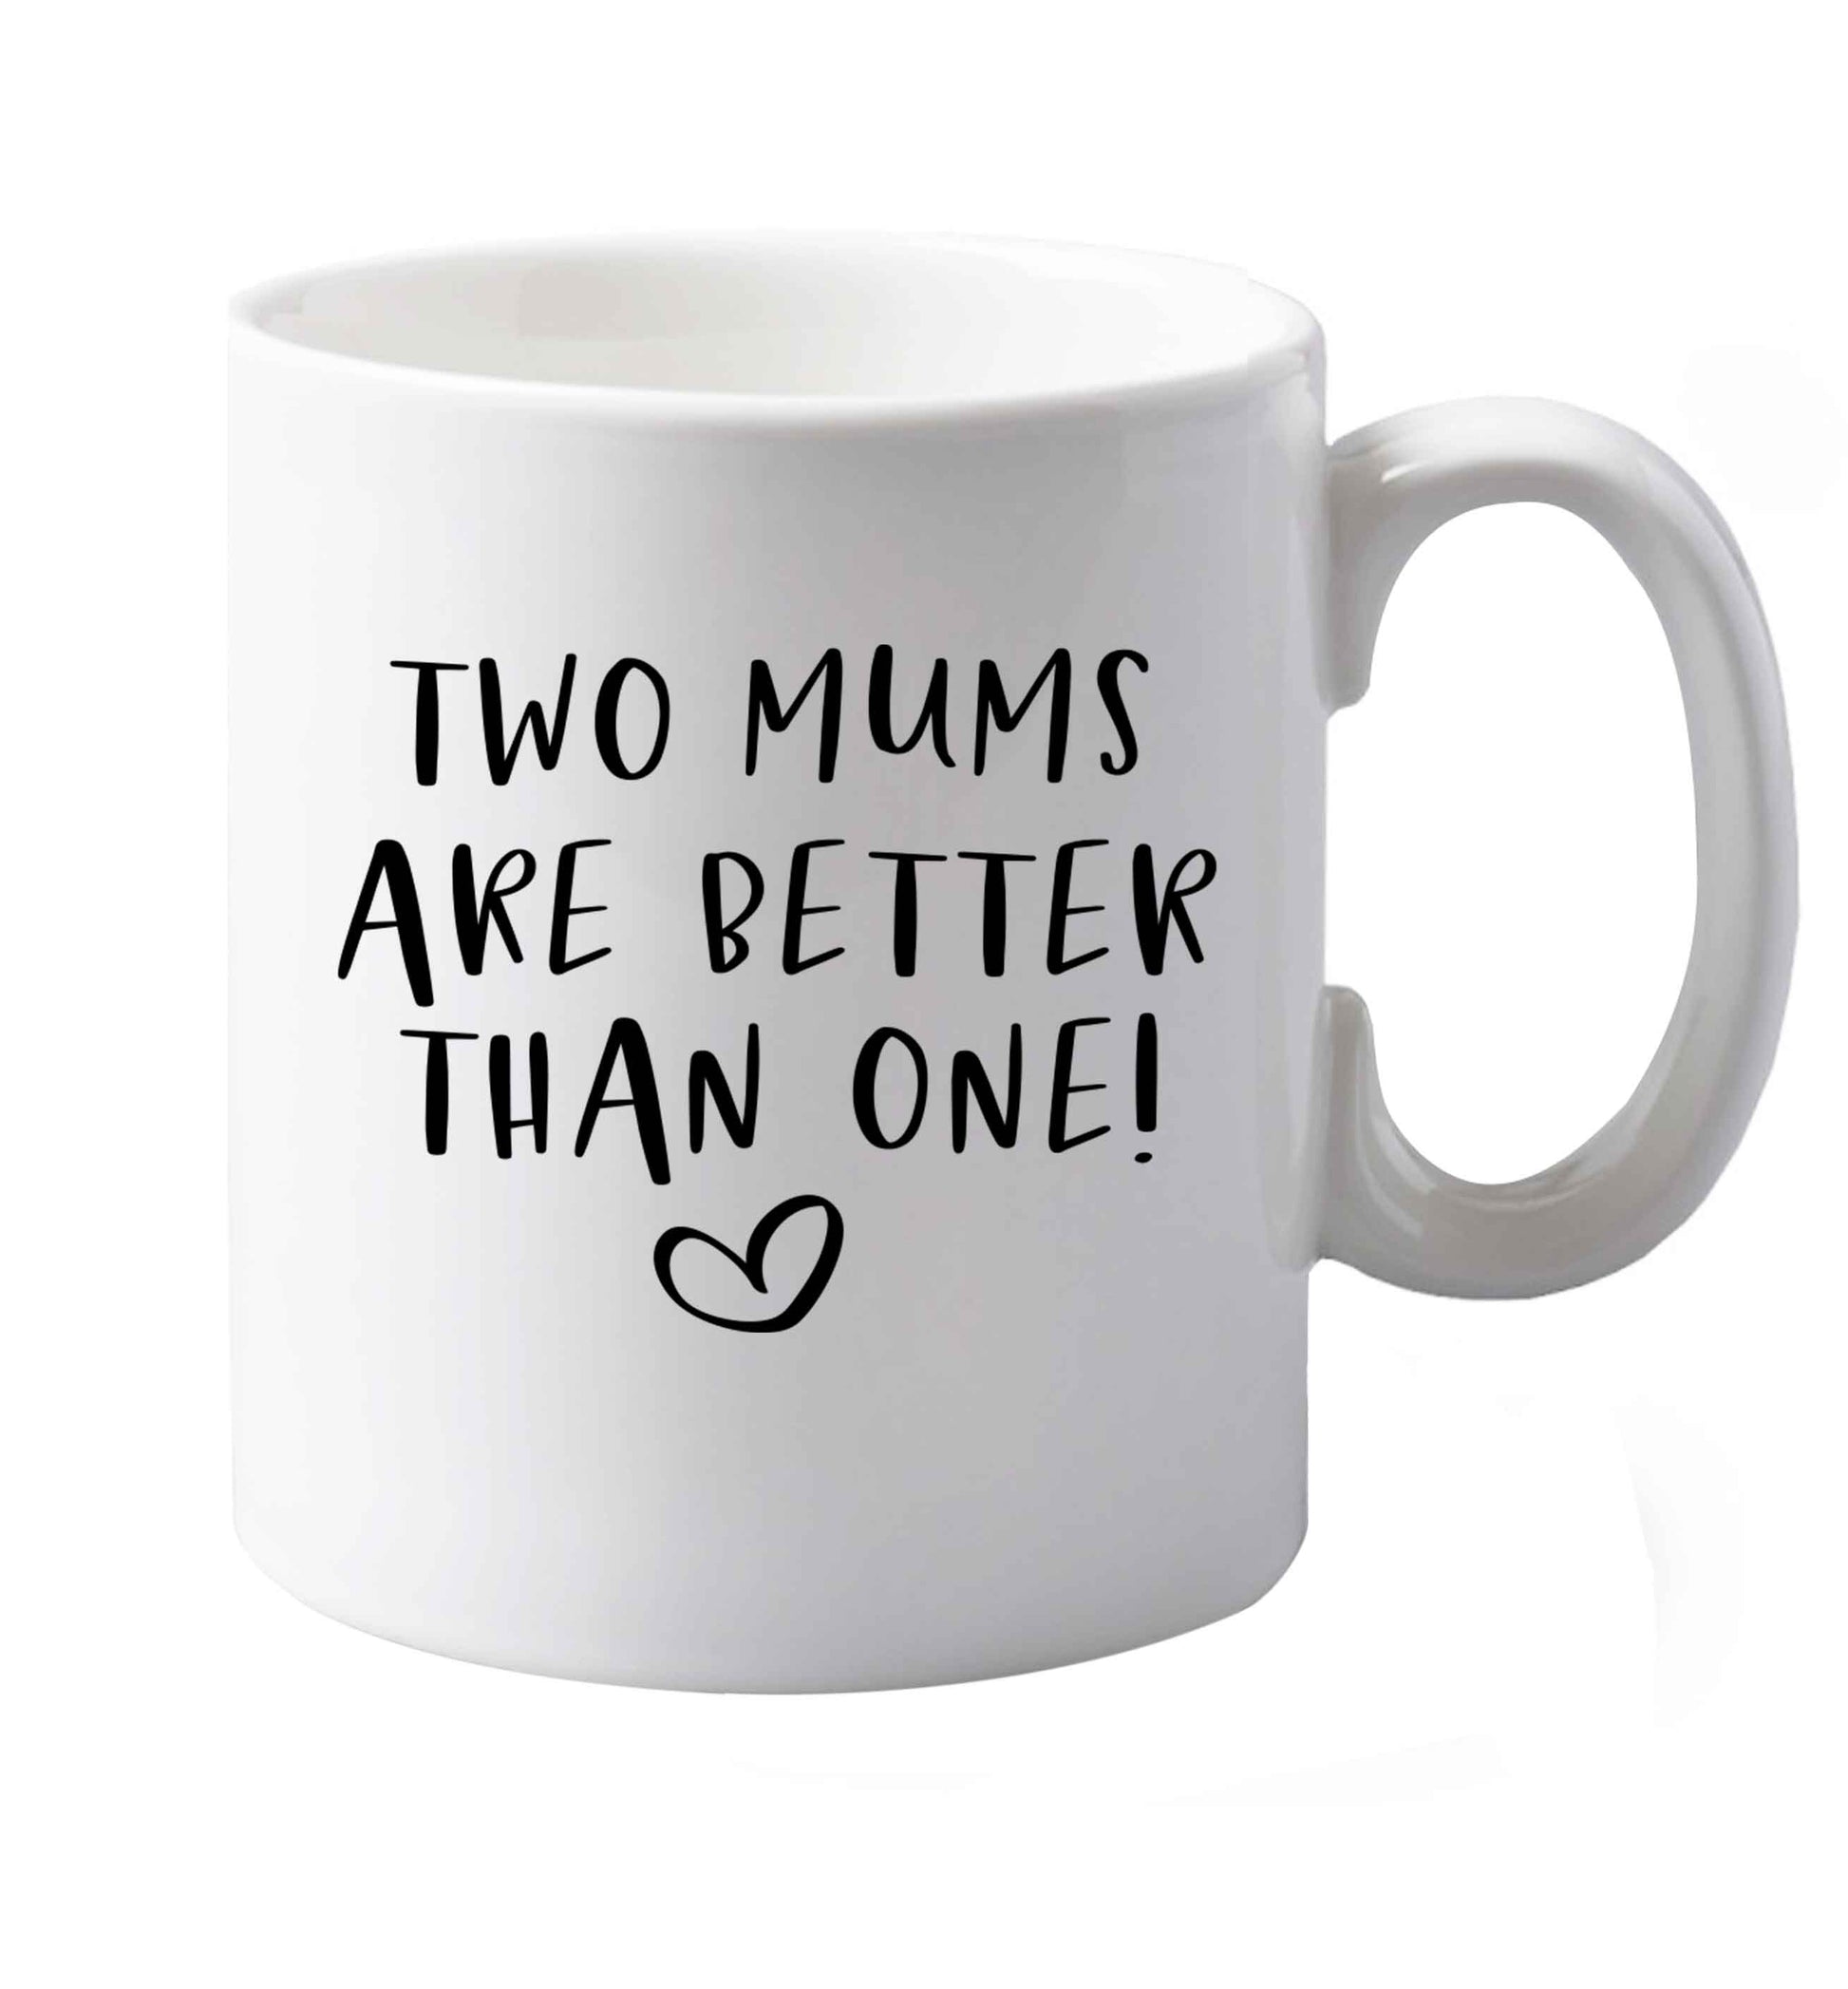 10 oz Two mums are better than one ceramic mug both sides